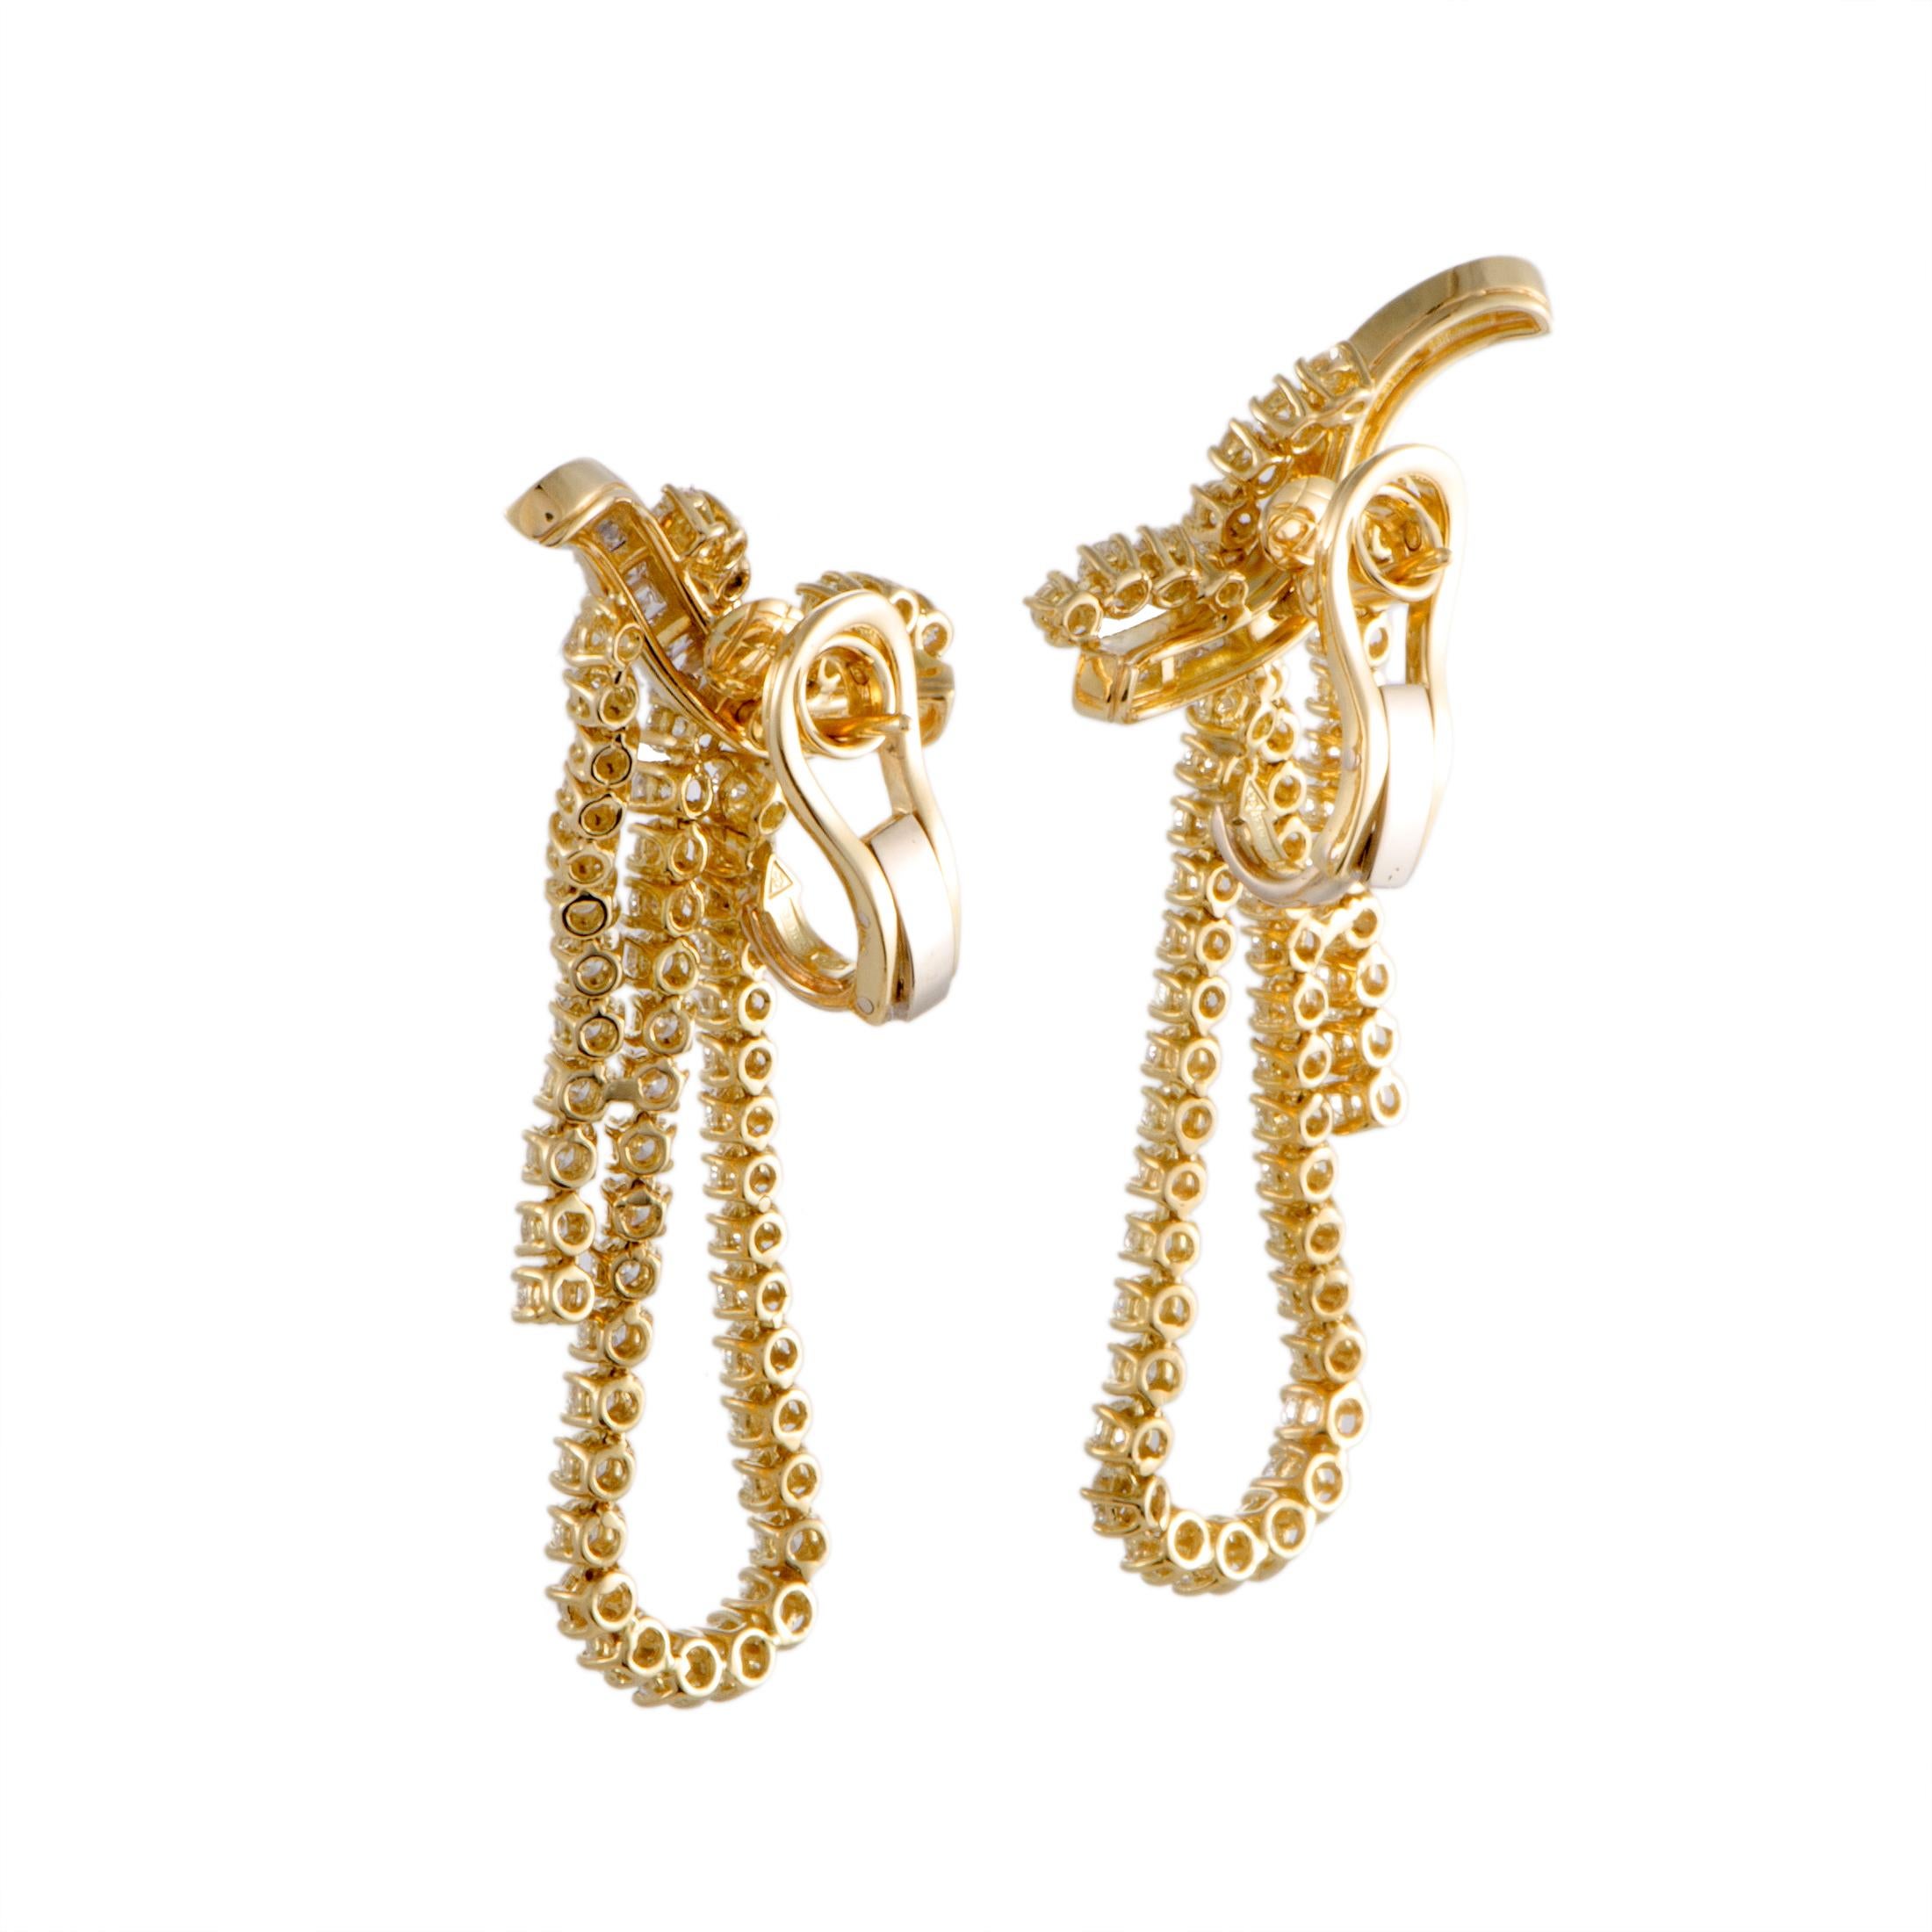 An exceptionally elegant design is marvelously presented in ever-luxurious 18K yellow gold in this exquisite pair of earrings that offers a splendidly sophisticated appearance. The earrings are lavishly decorated with dazzling diamonds that amount